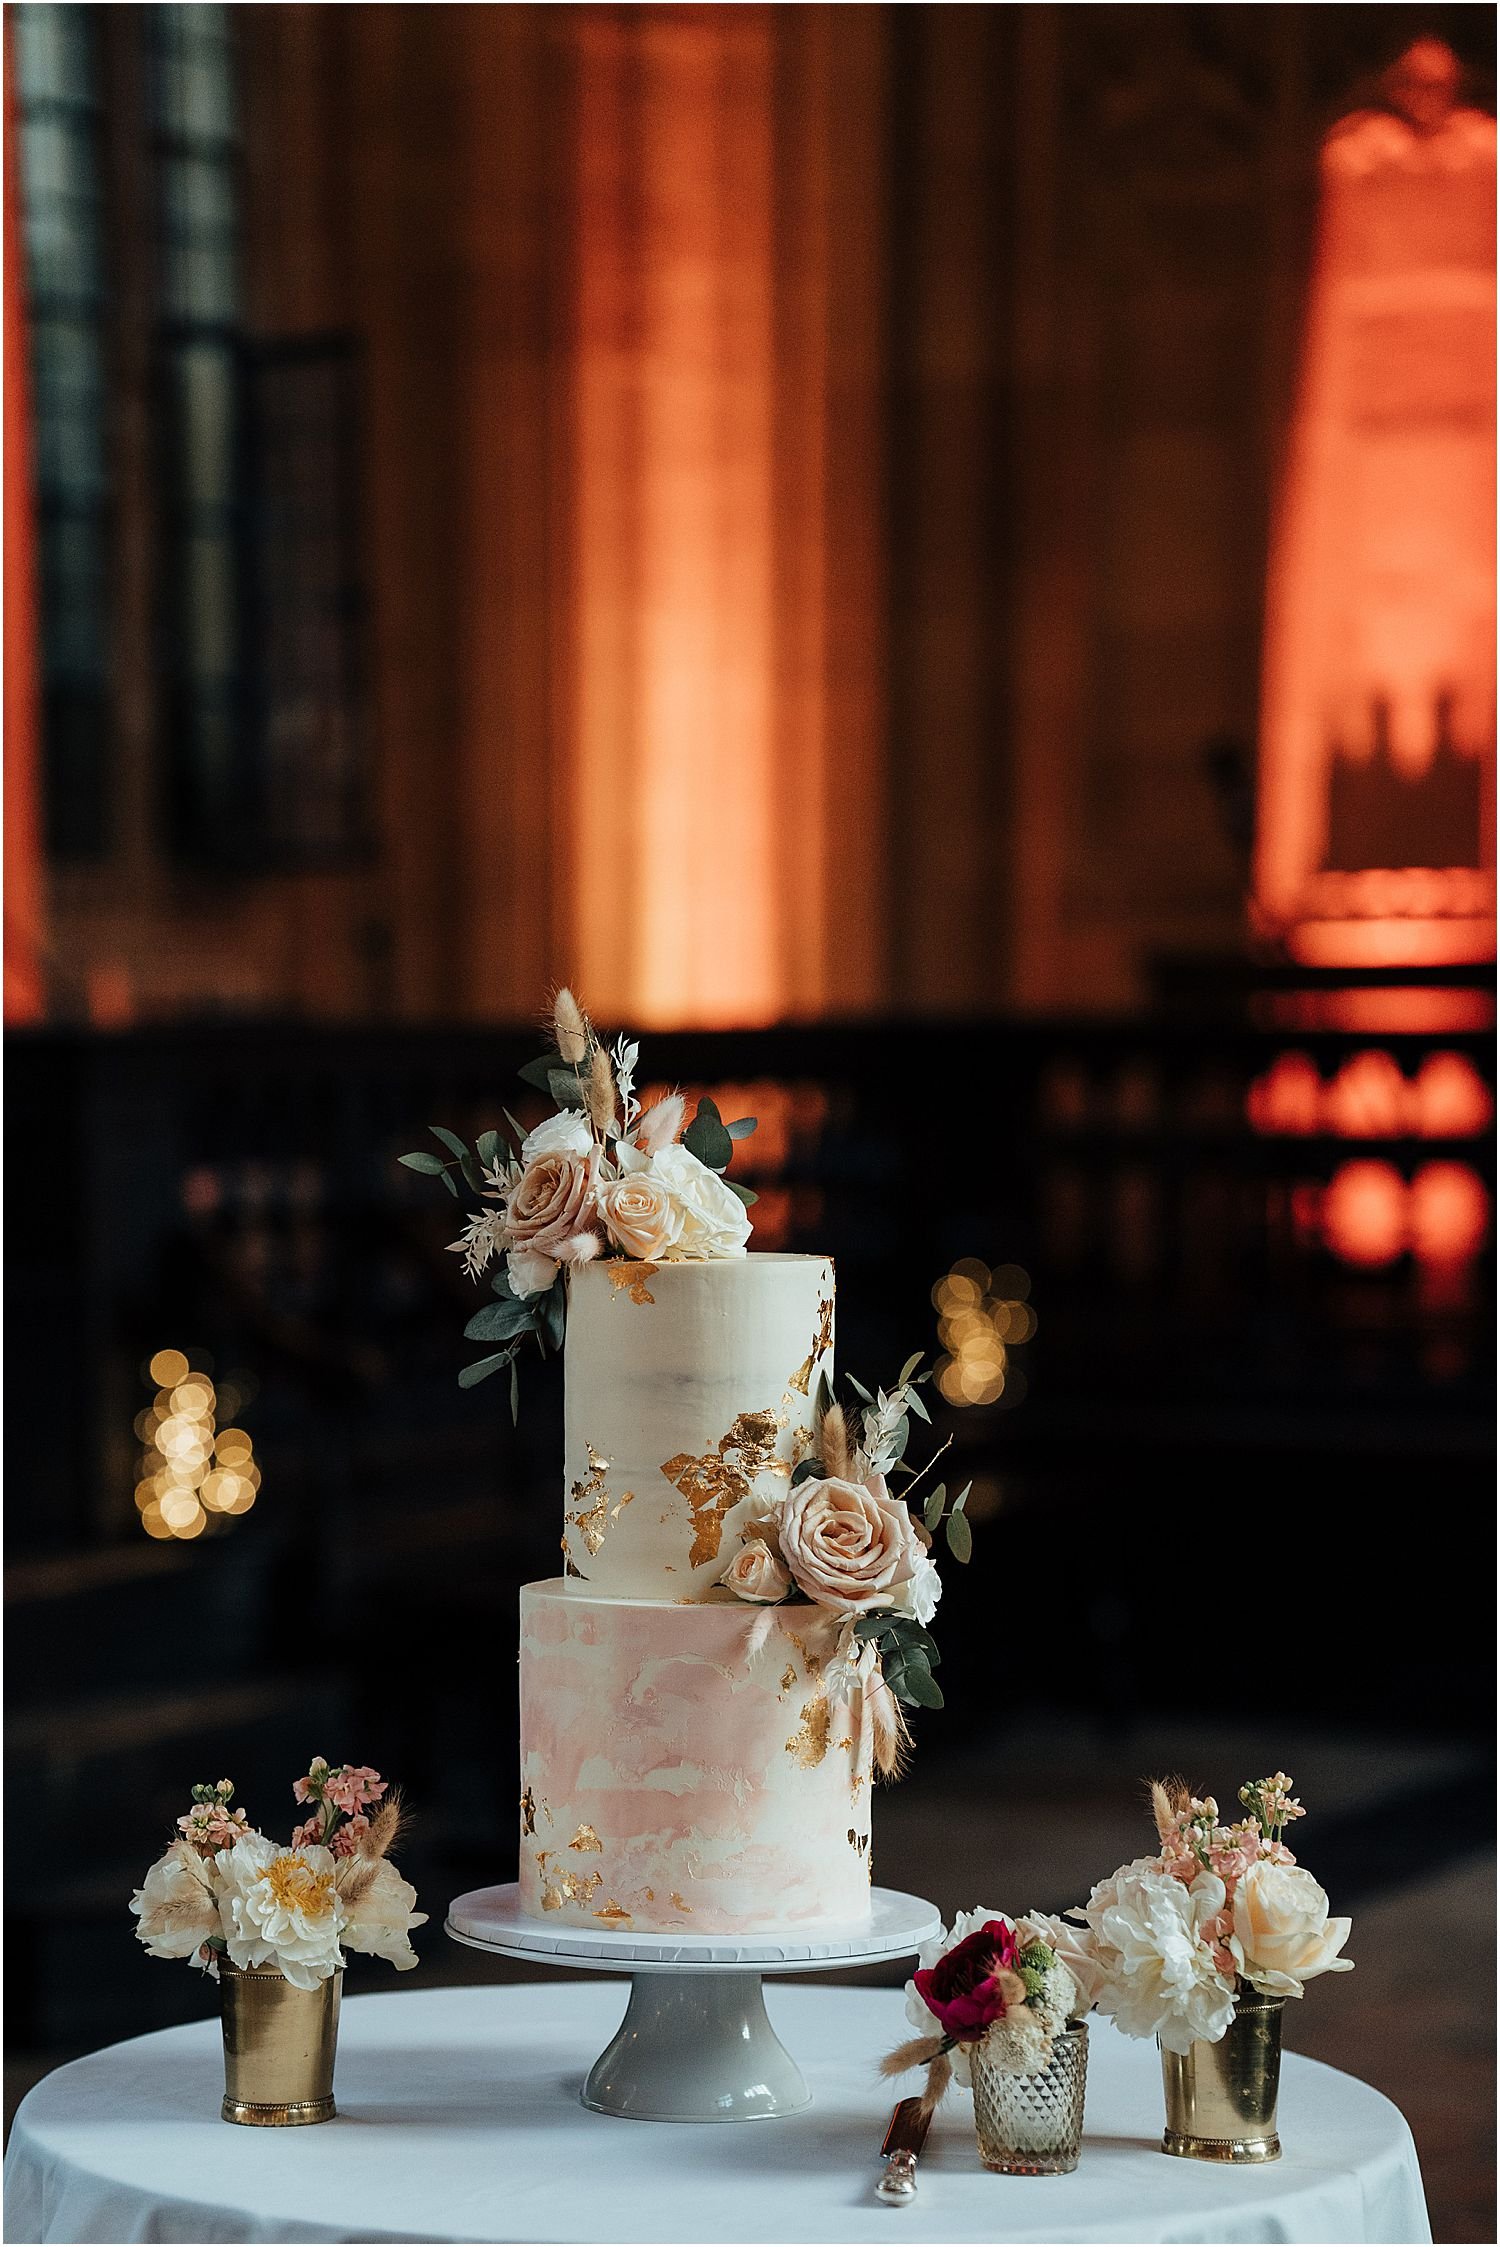 Wedding cake by Flour and Fold